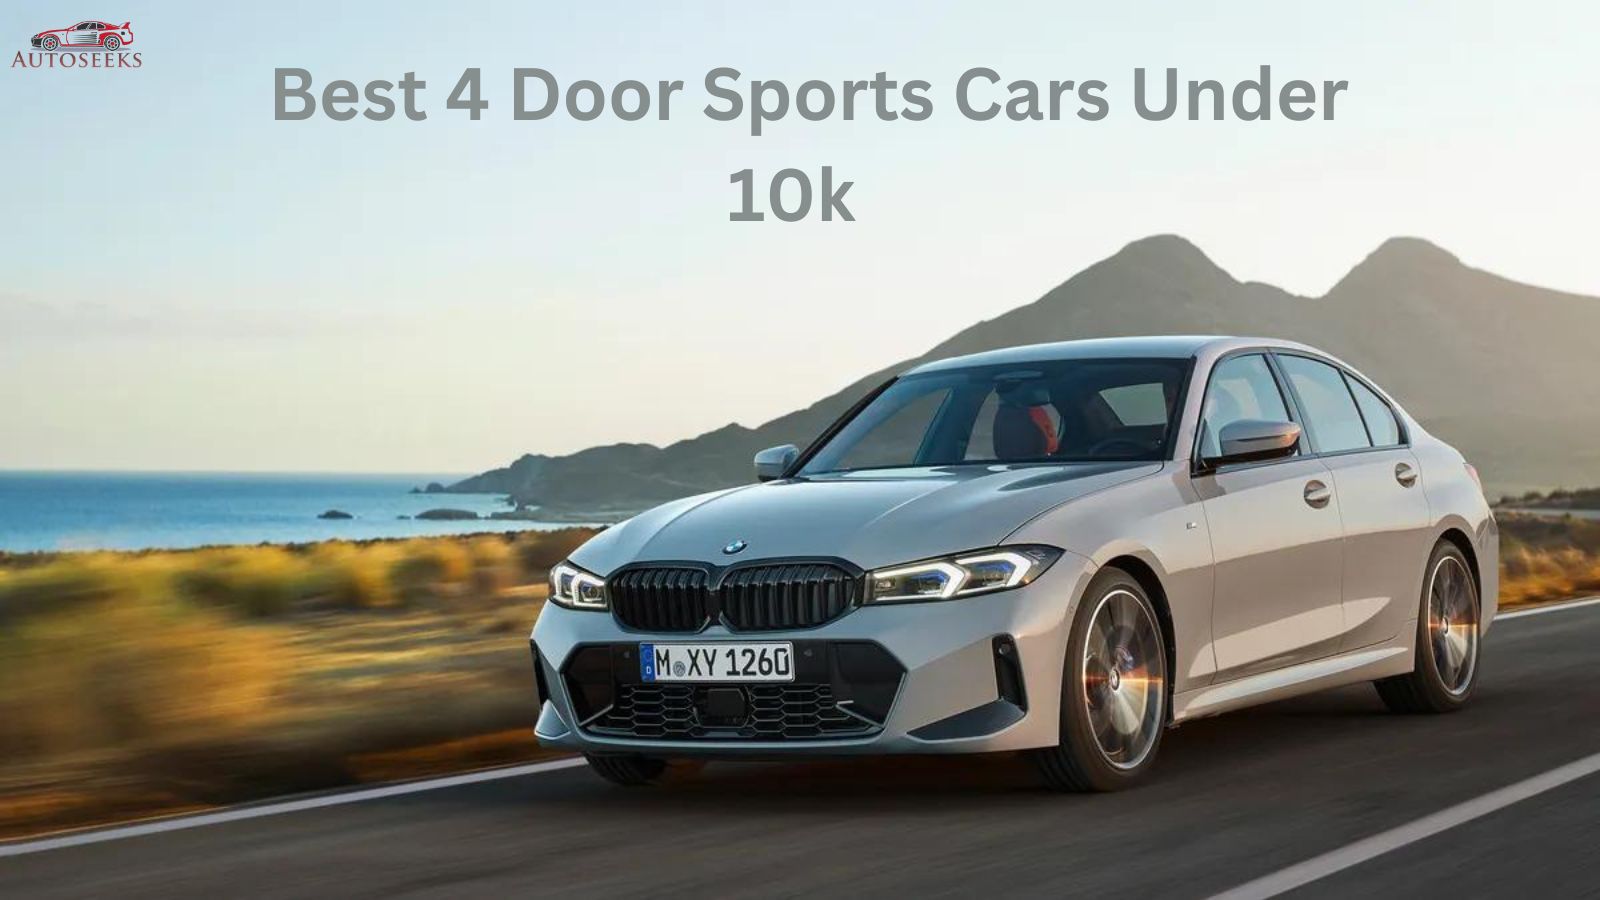 10 Best 4 Door Sports Cars Under 10k Just For You